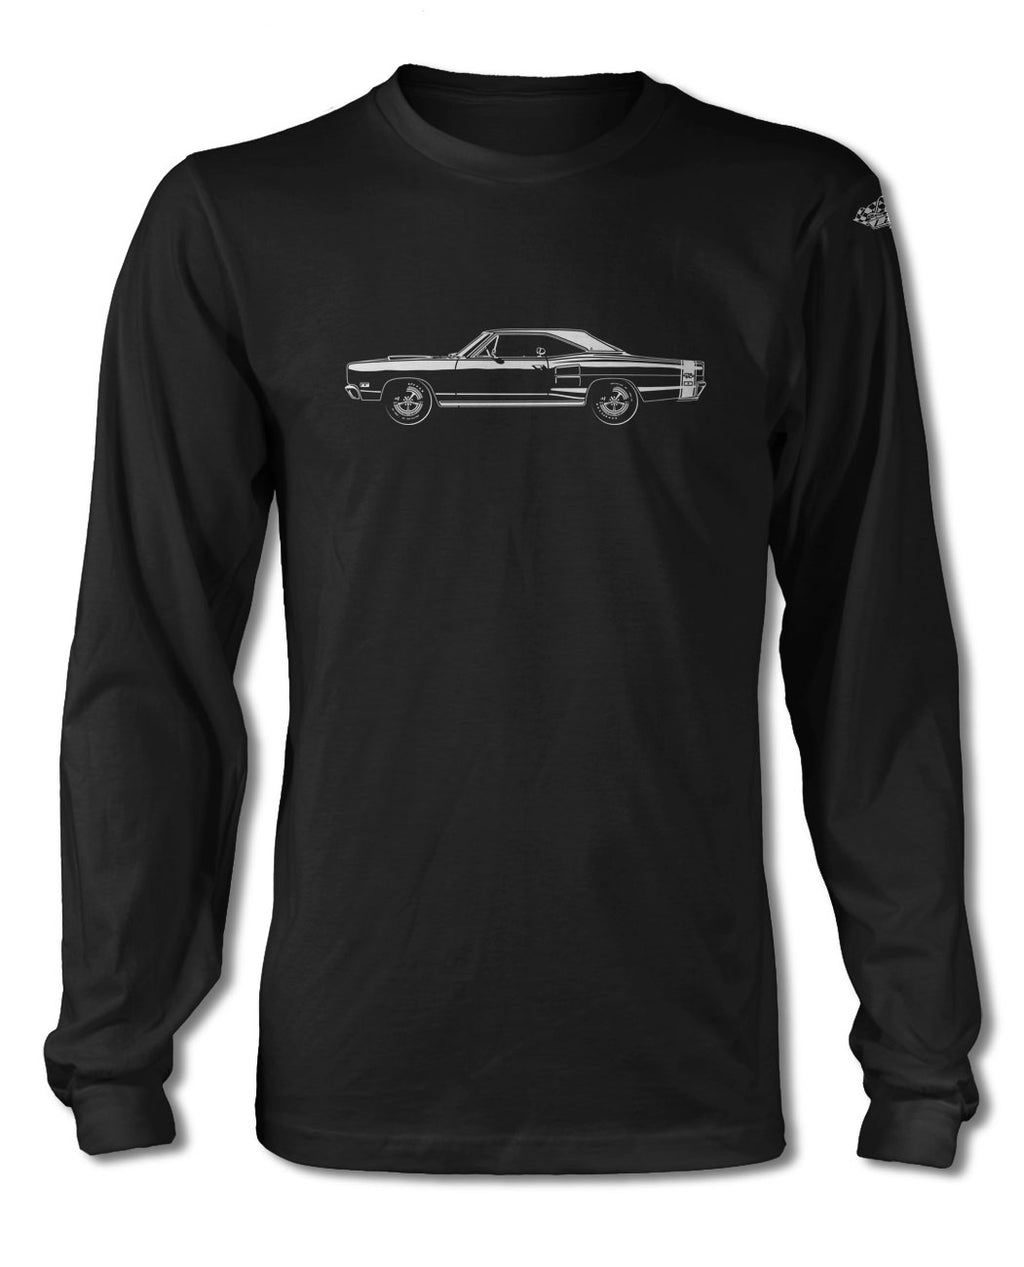 1969 Dodge Coronet RT Hardtop with Stripes T-Shirt - Long Sleeves - Side View